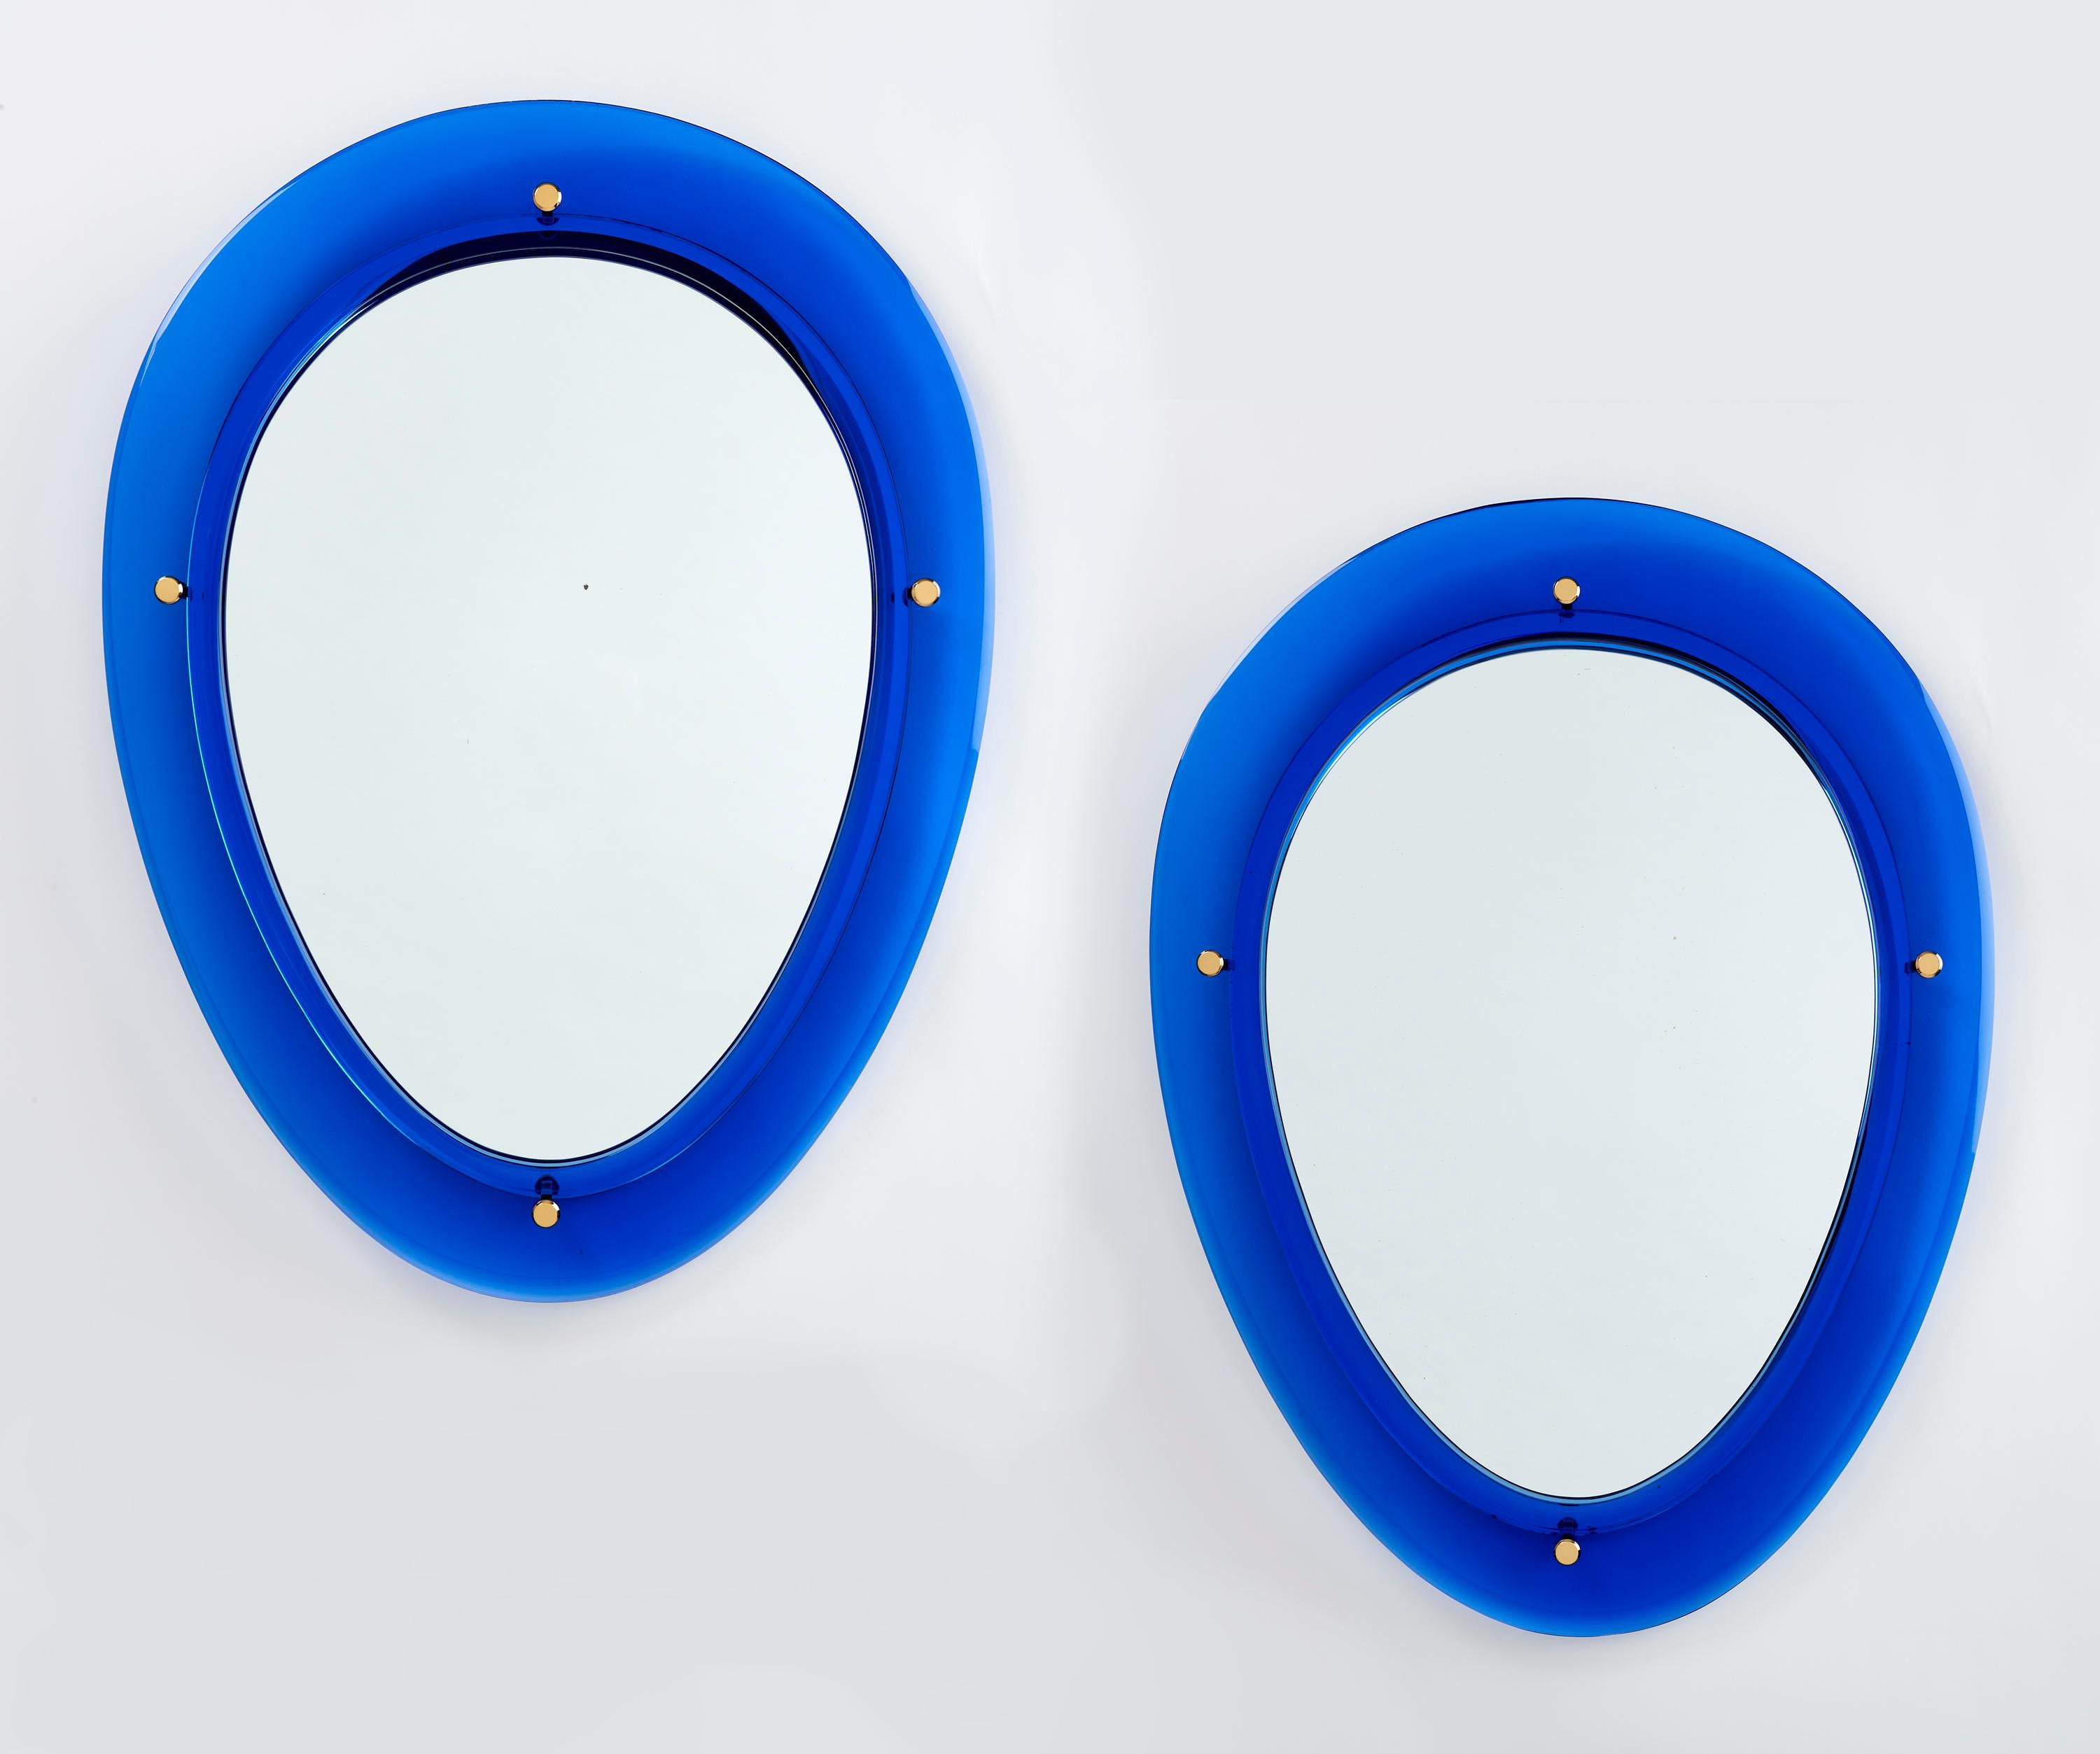 ITALY, 1960s
A single oval shaped blue glass mirror, with nicely beveled glass frames and four polished brass mounts.
ONE MIRROR AVAILABLE
Dimensions: 33 H x 25 W x 2 D.


